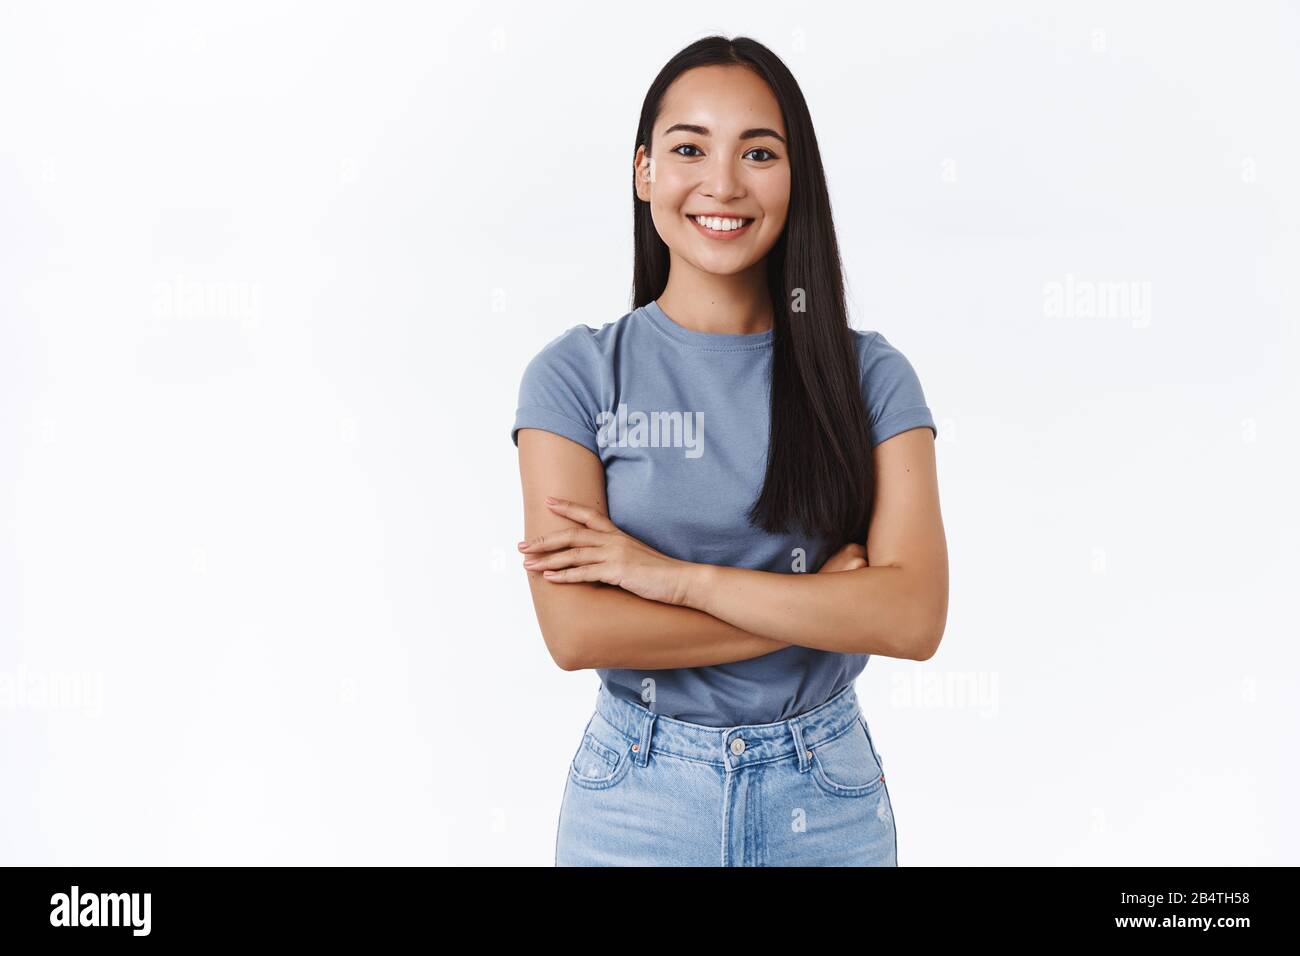 Lively, enthusiastic and determined smiling confident asian girl ready tackle any task, cross fingers over chest assertive, self-assured, smiling Stock Photo